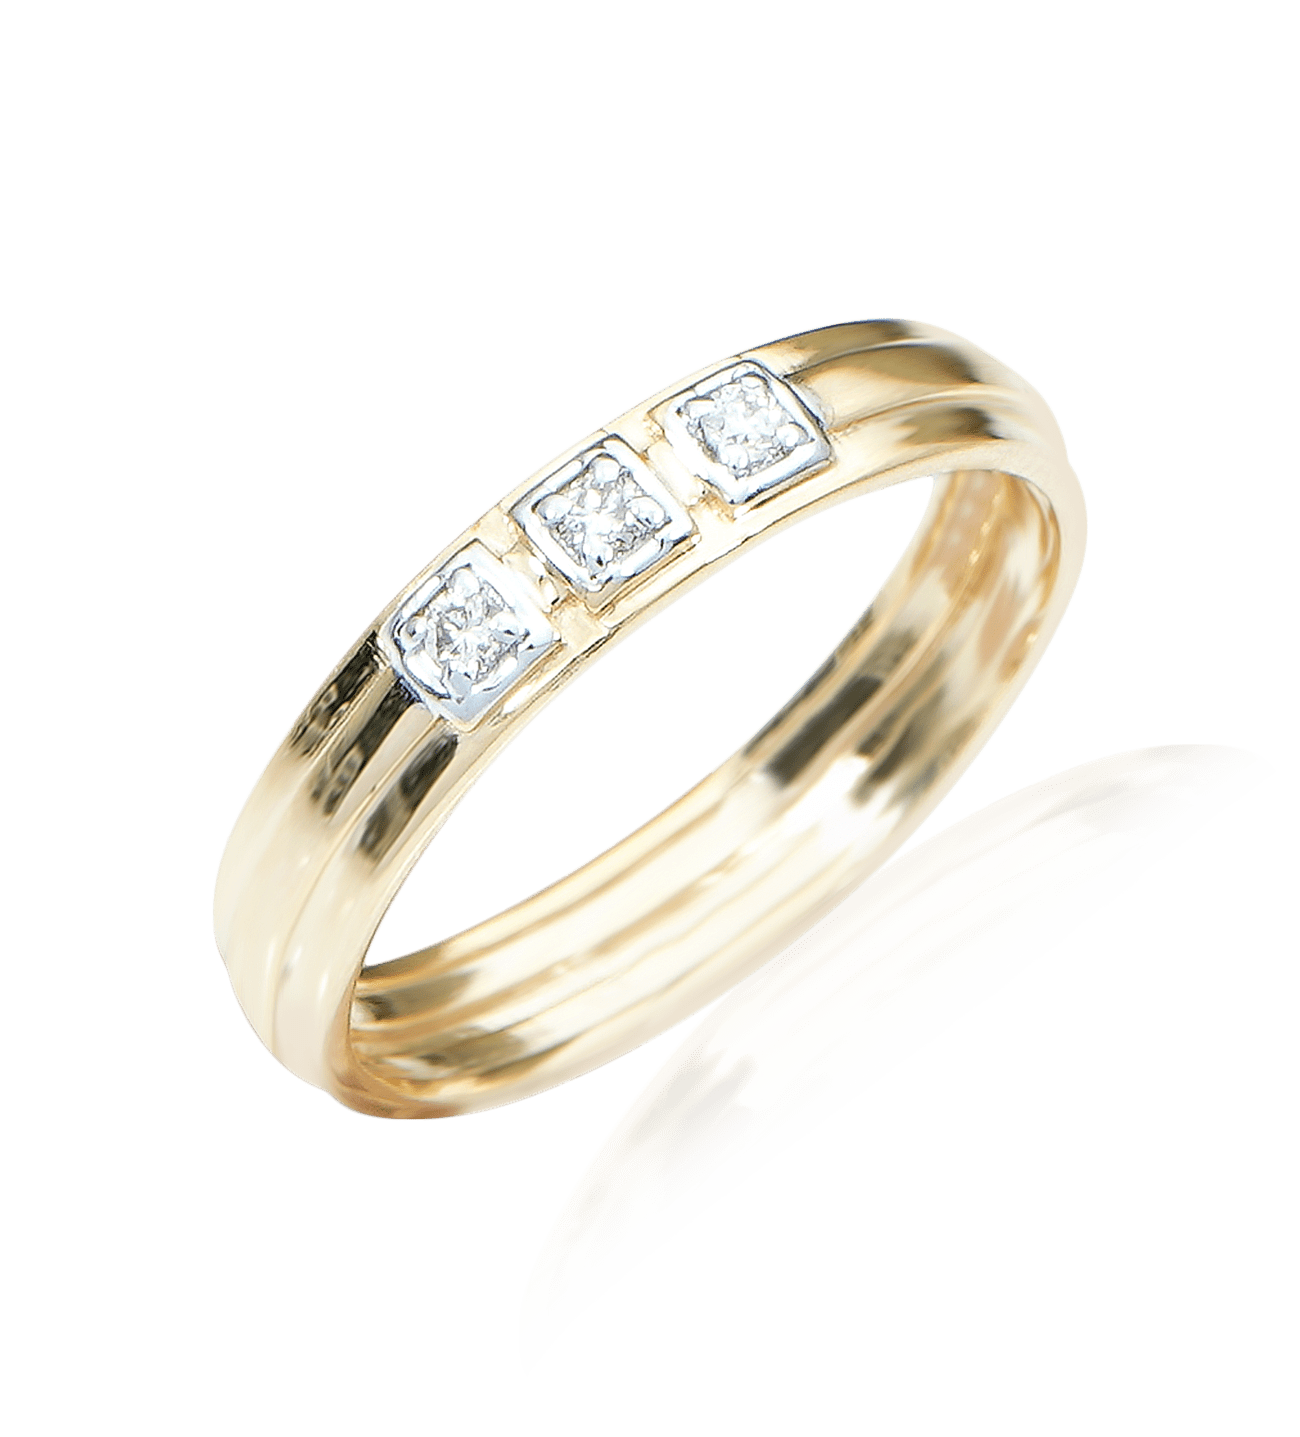 2mm Gold Delicate Wedding Band Ring | Berlinger Jewelry